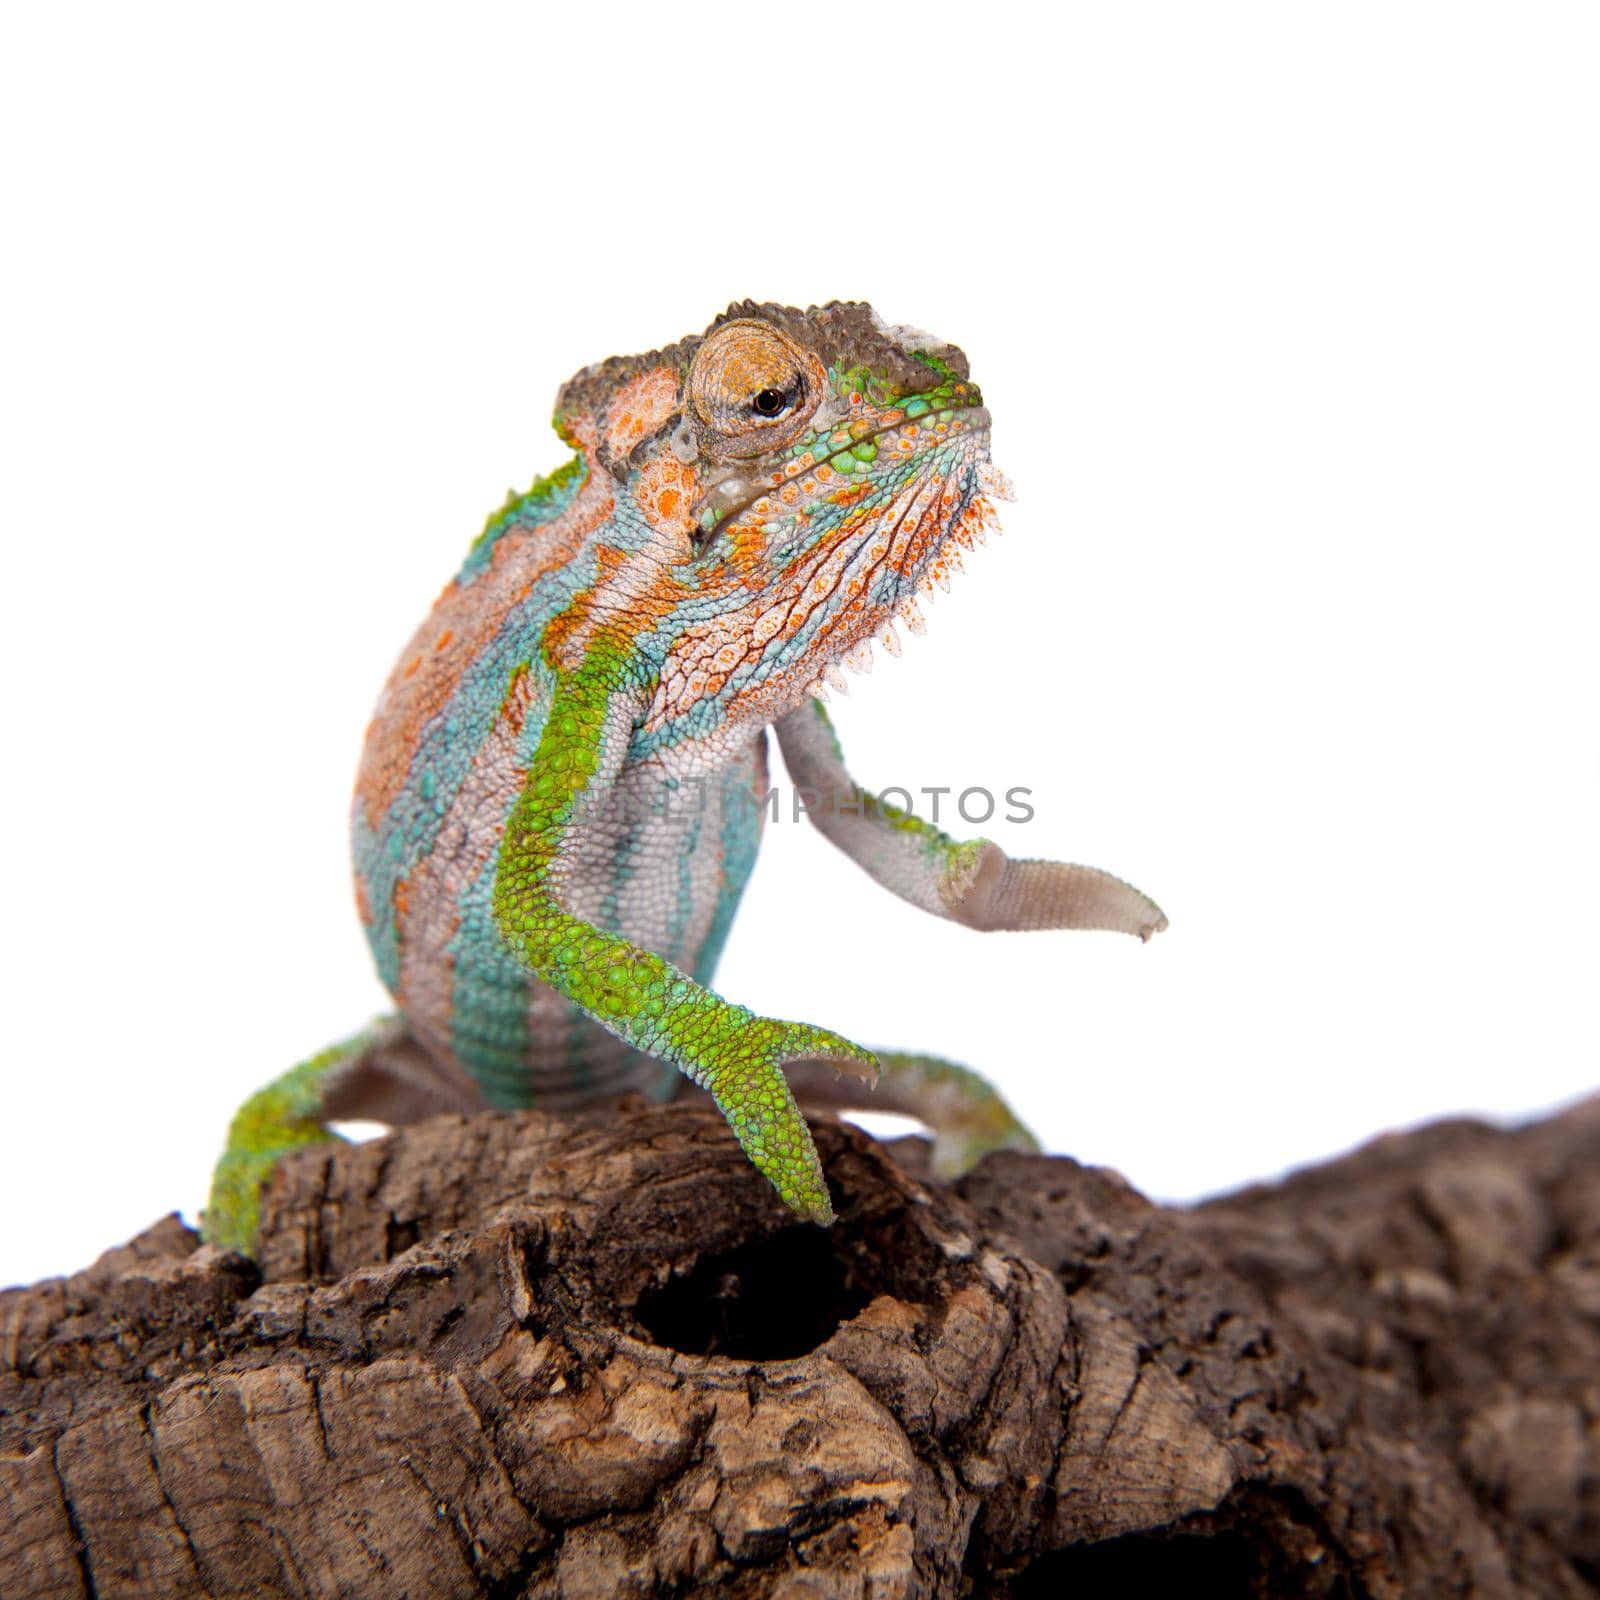 The Cape dwarf chameleon, Bradypodion pumilum, isolated on white background